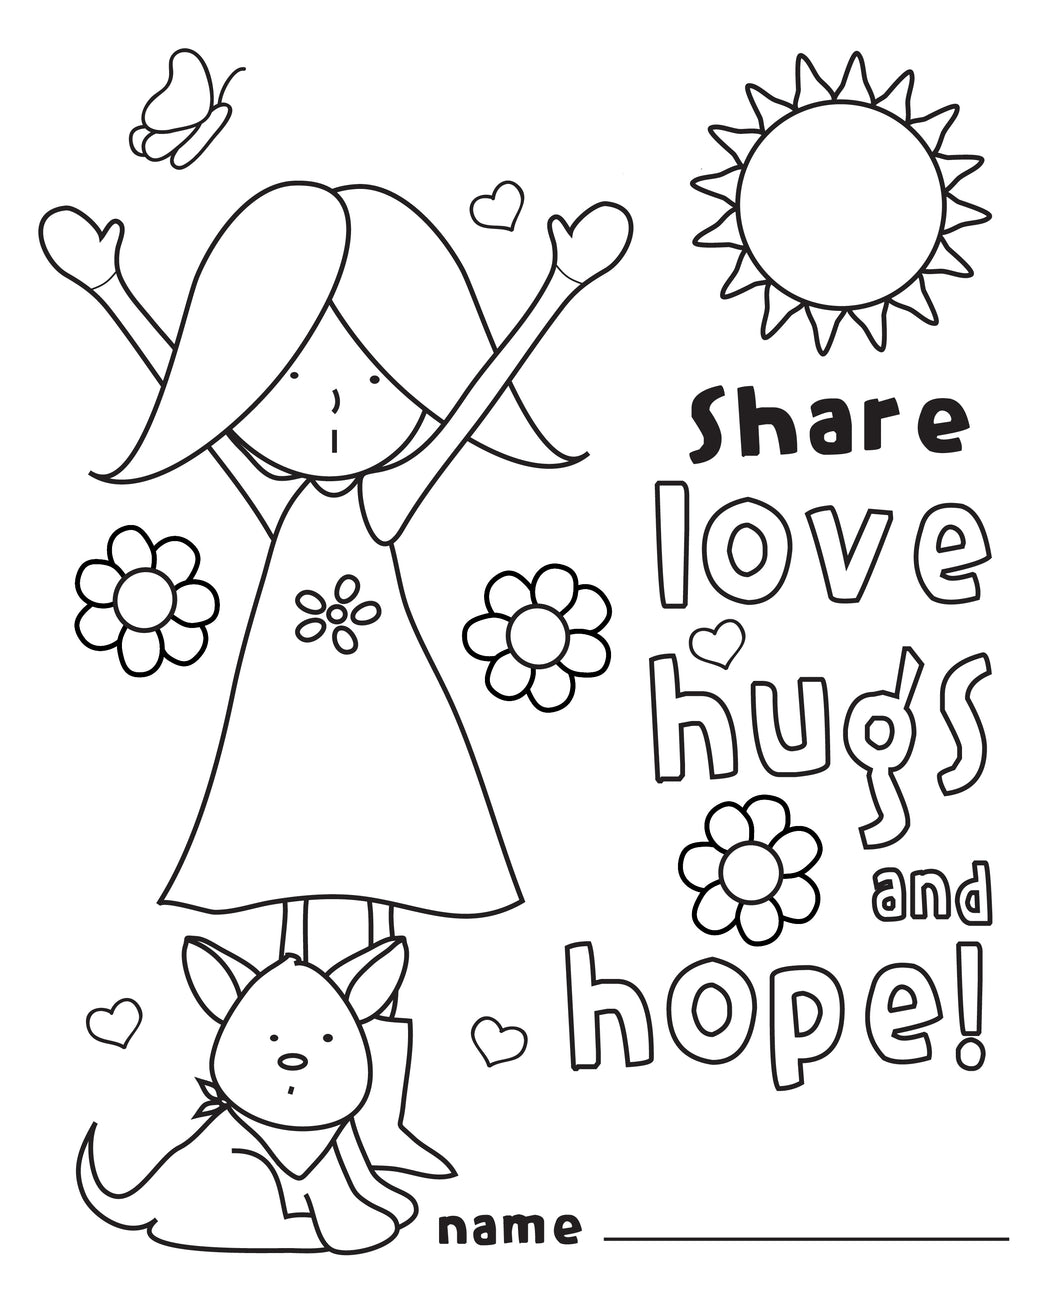 Love, Hugs, and Hope Coloring Page 1 – Huckleberry Moose